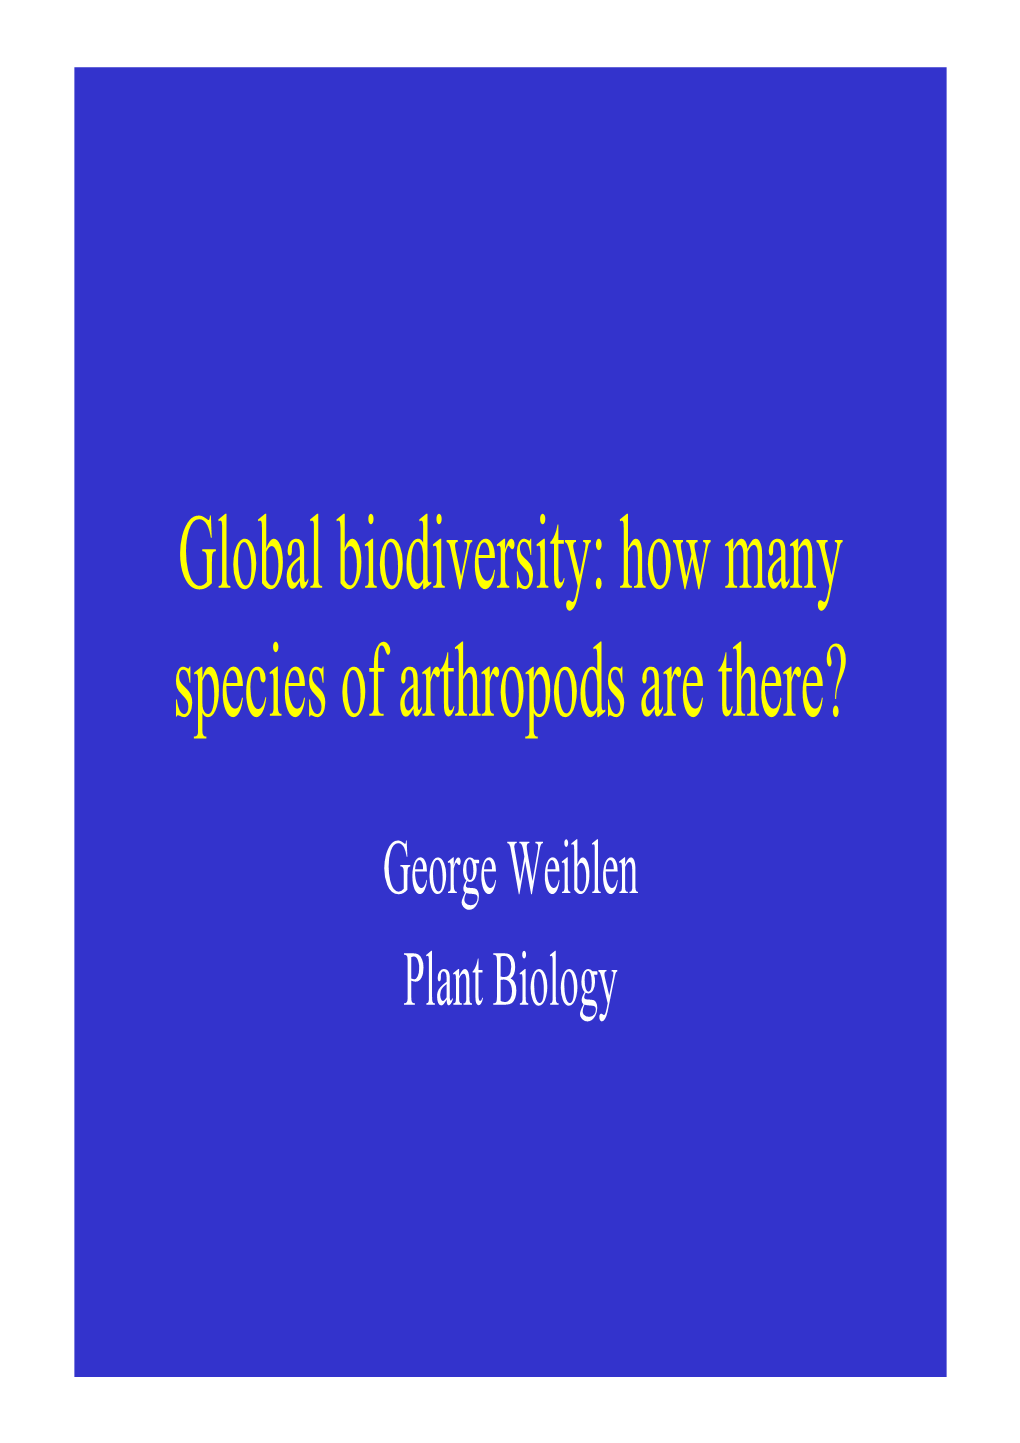 Global Biodiversity: How Many Species of Arthropods Are There?